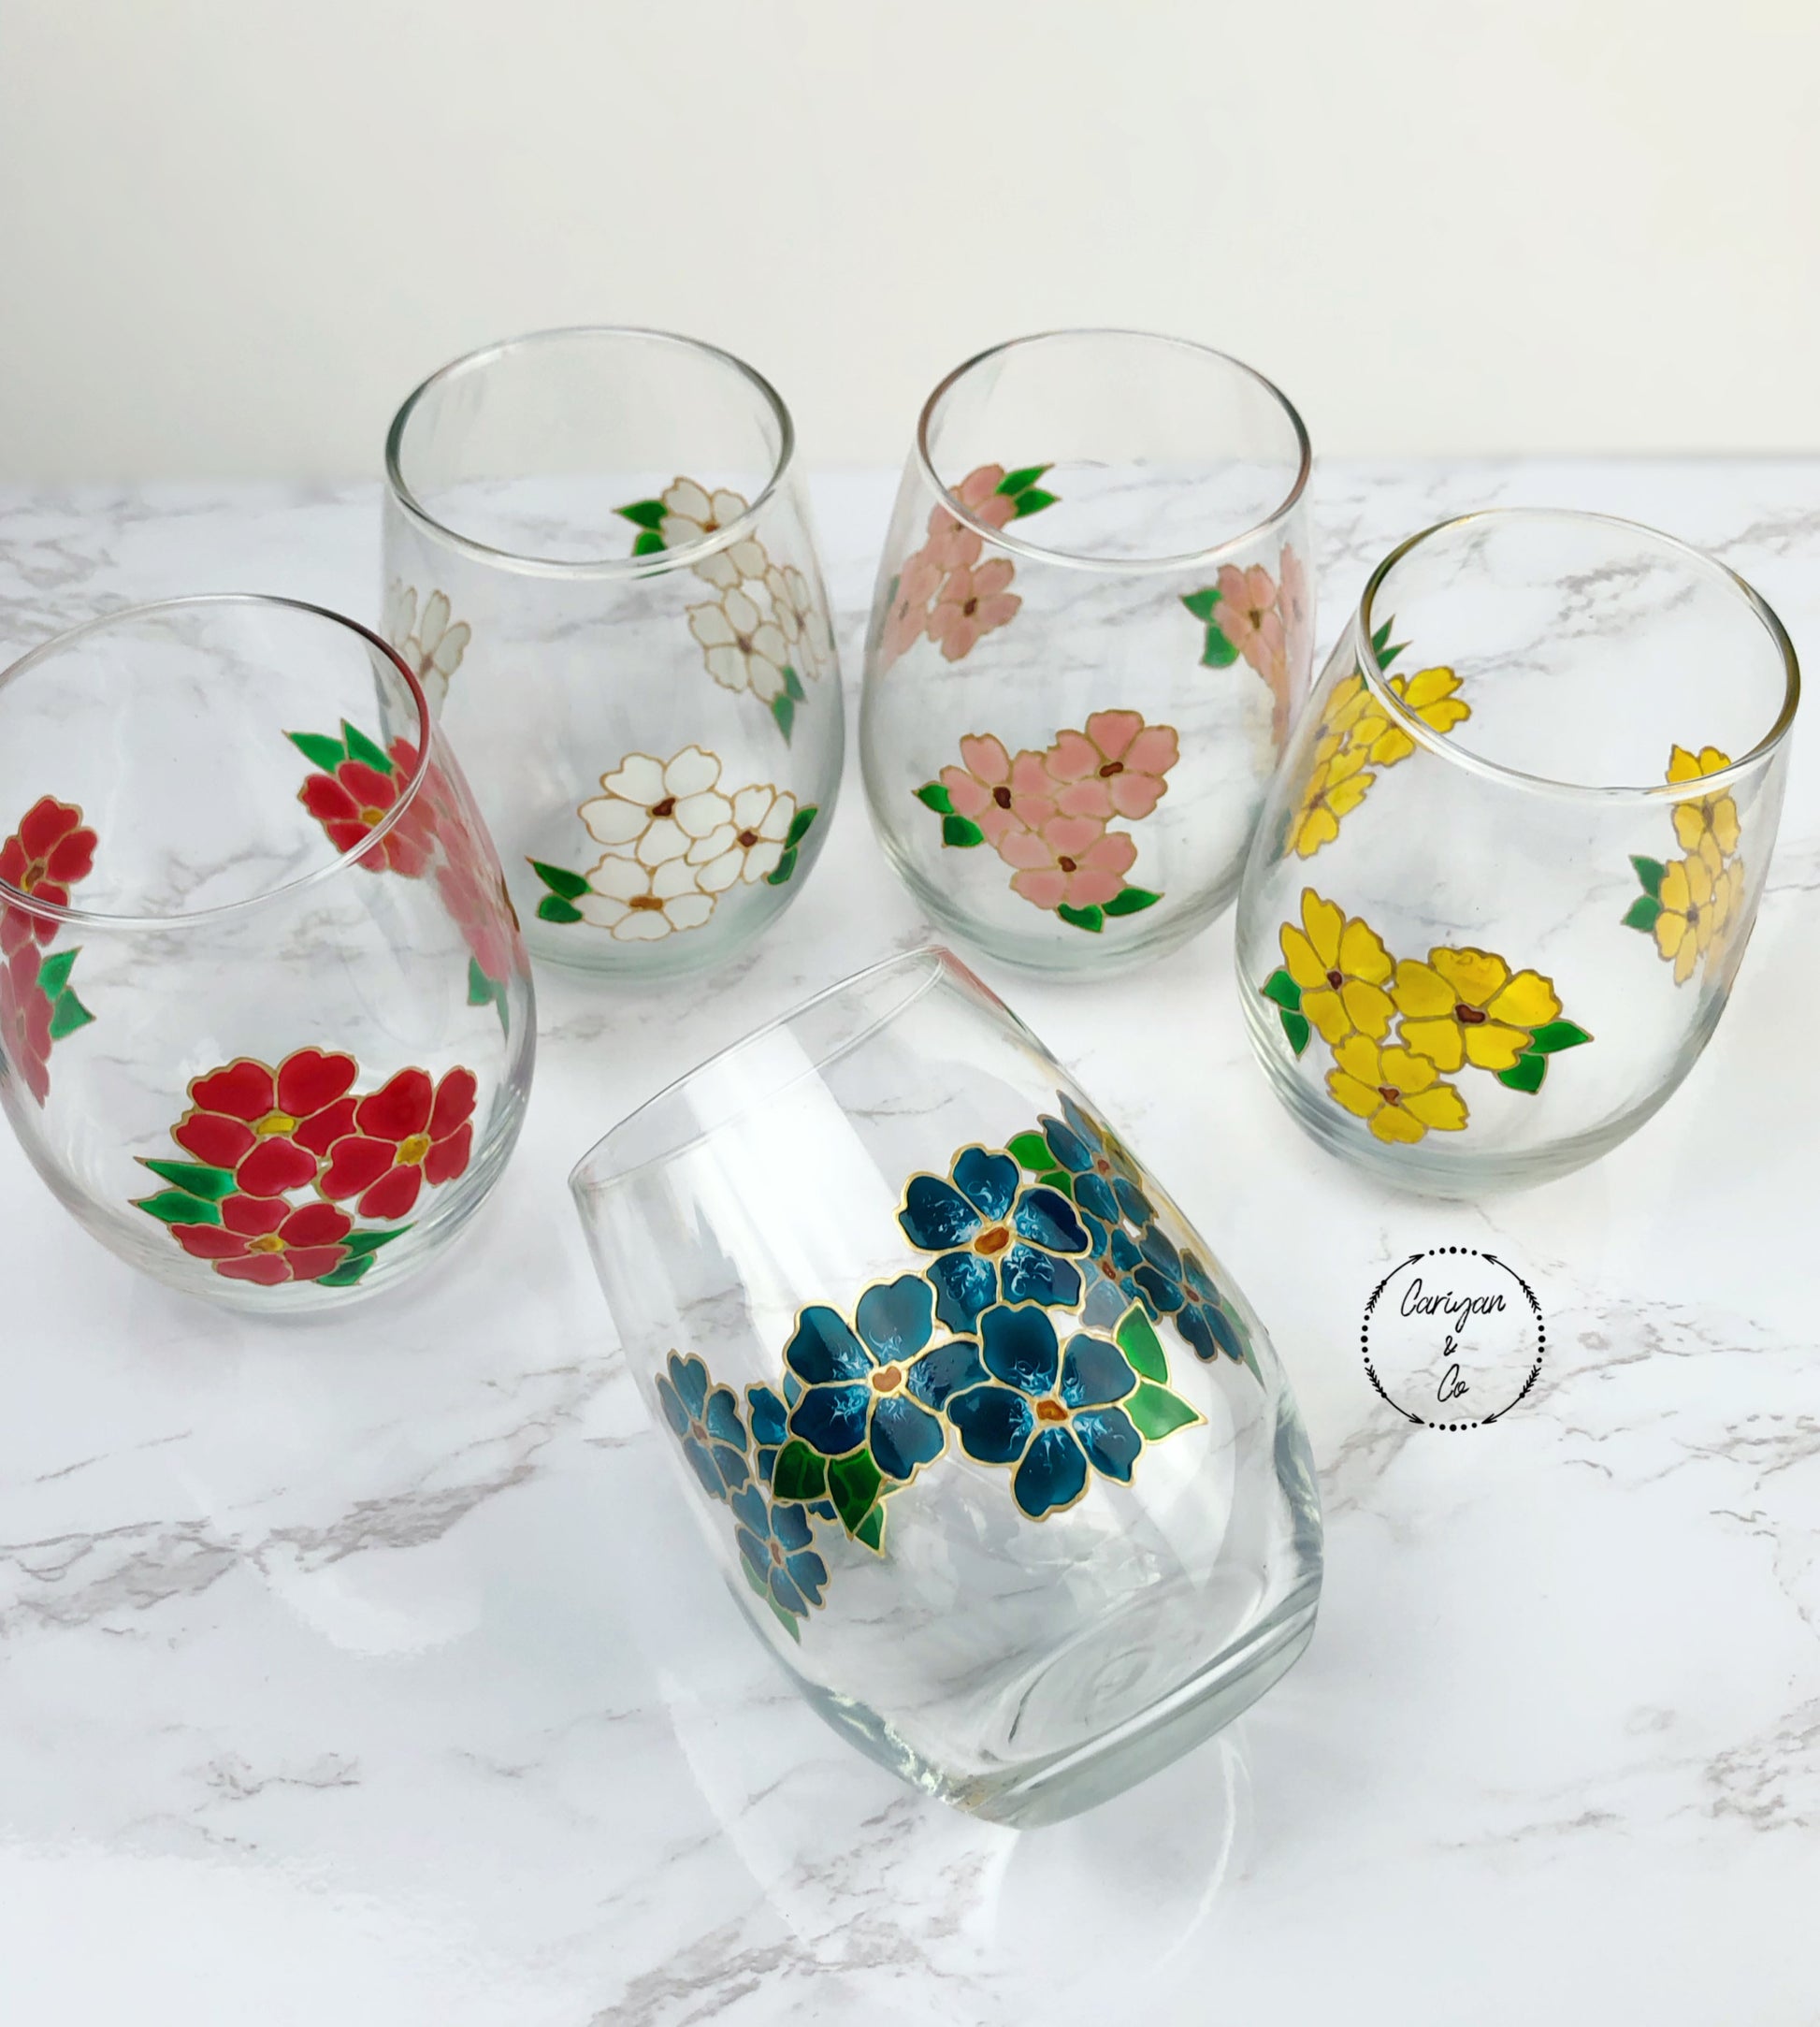 Glass Beach Ocean Themed Stem Wine Glass Blue Teal and Gold Glitter Wine  Glass Mom Gift Hand Painted Housewarming Gift 